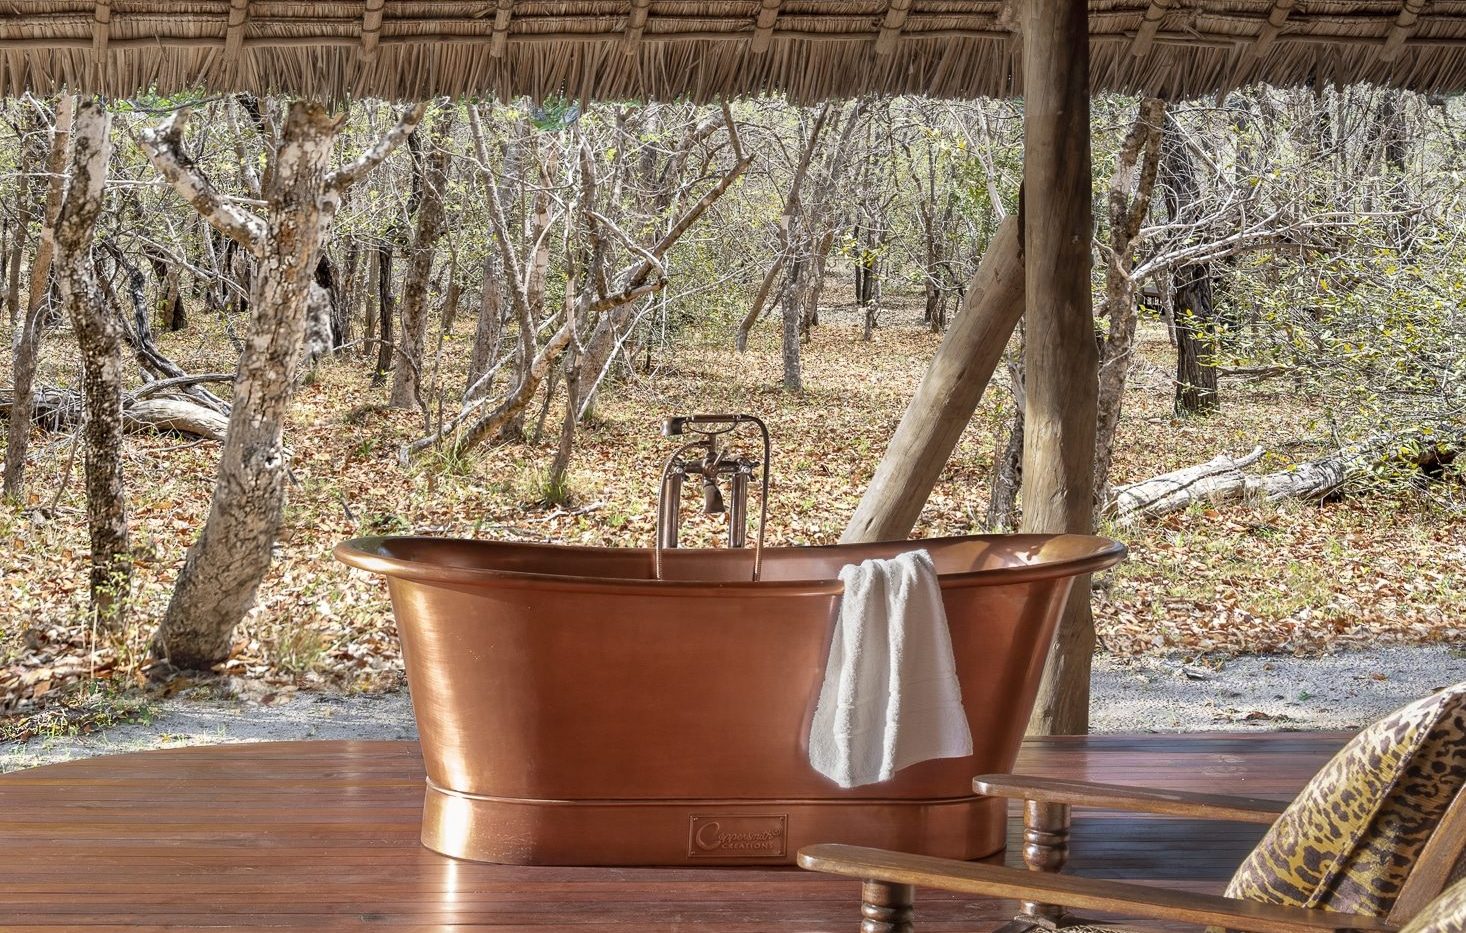 Siwandu Tented suites with bath on deck